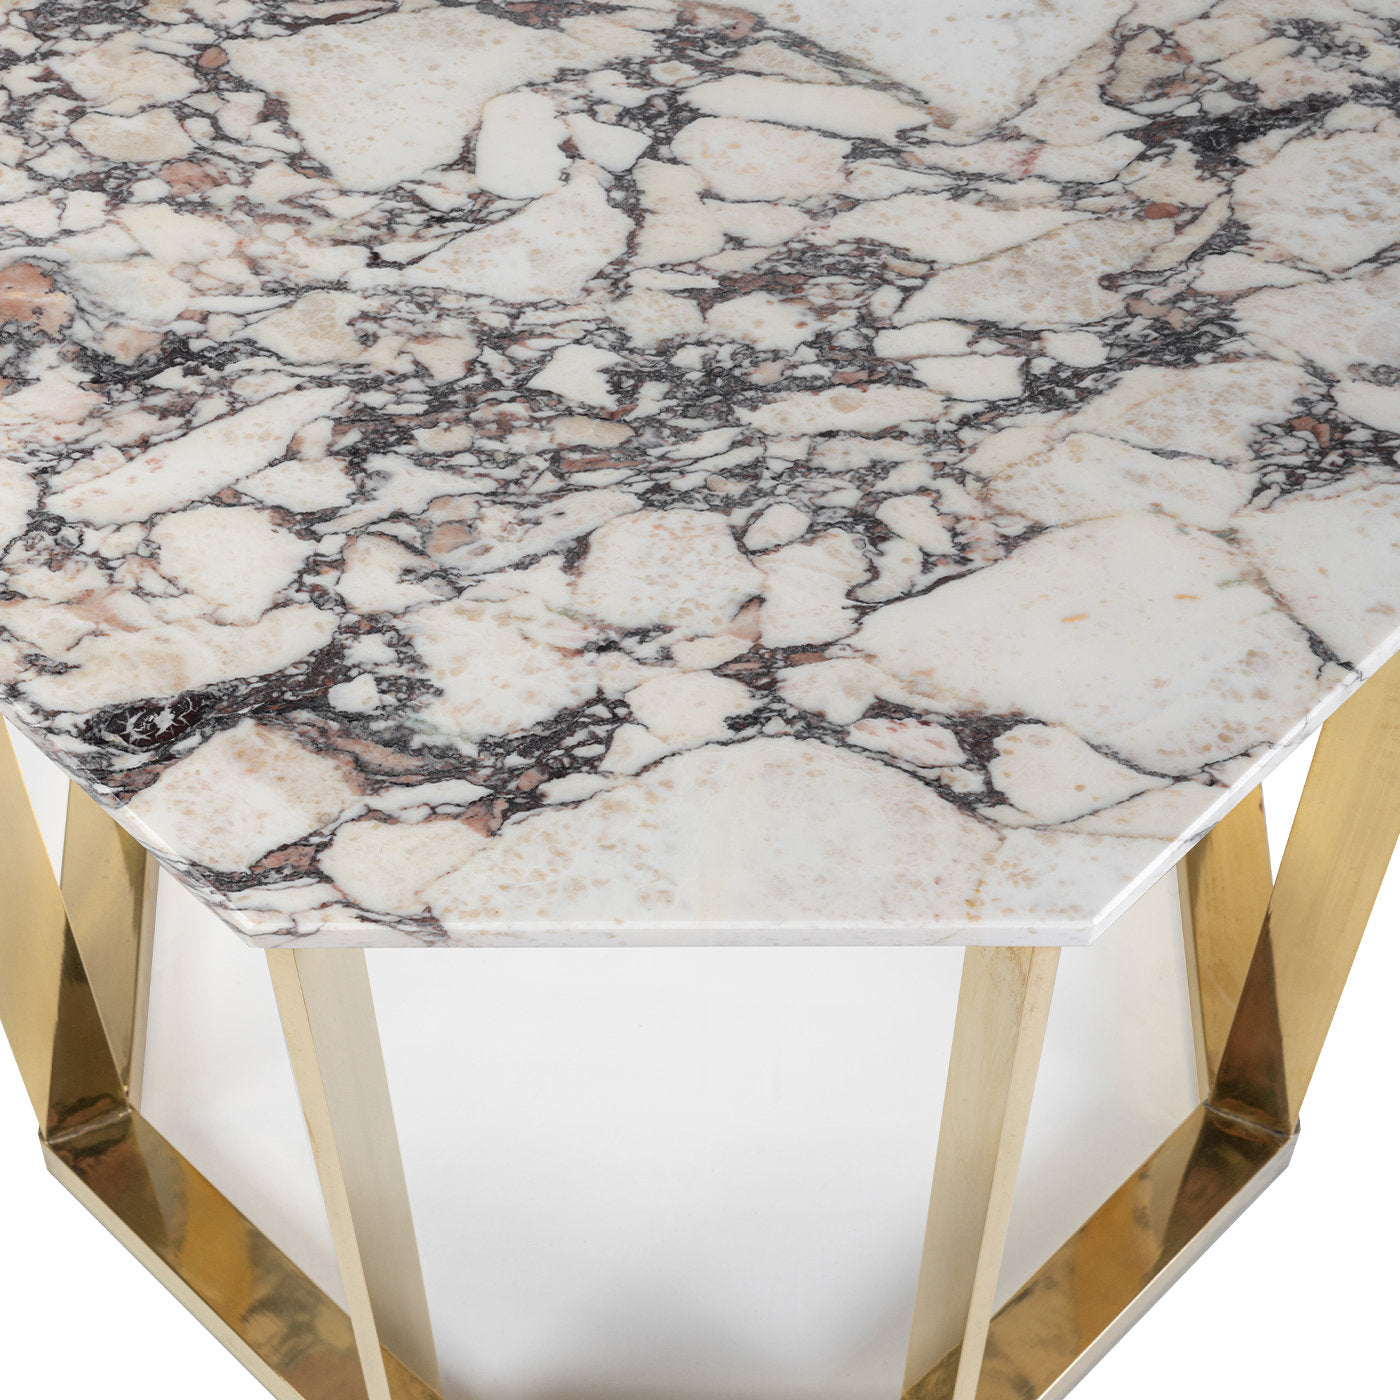 Art of Stone Side Table - Alternative view 4